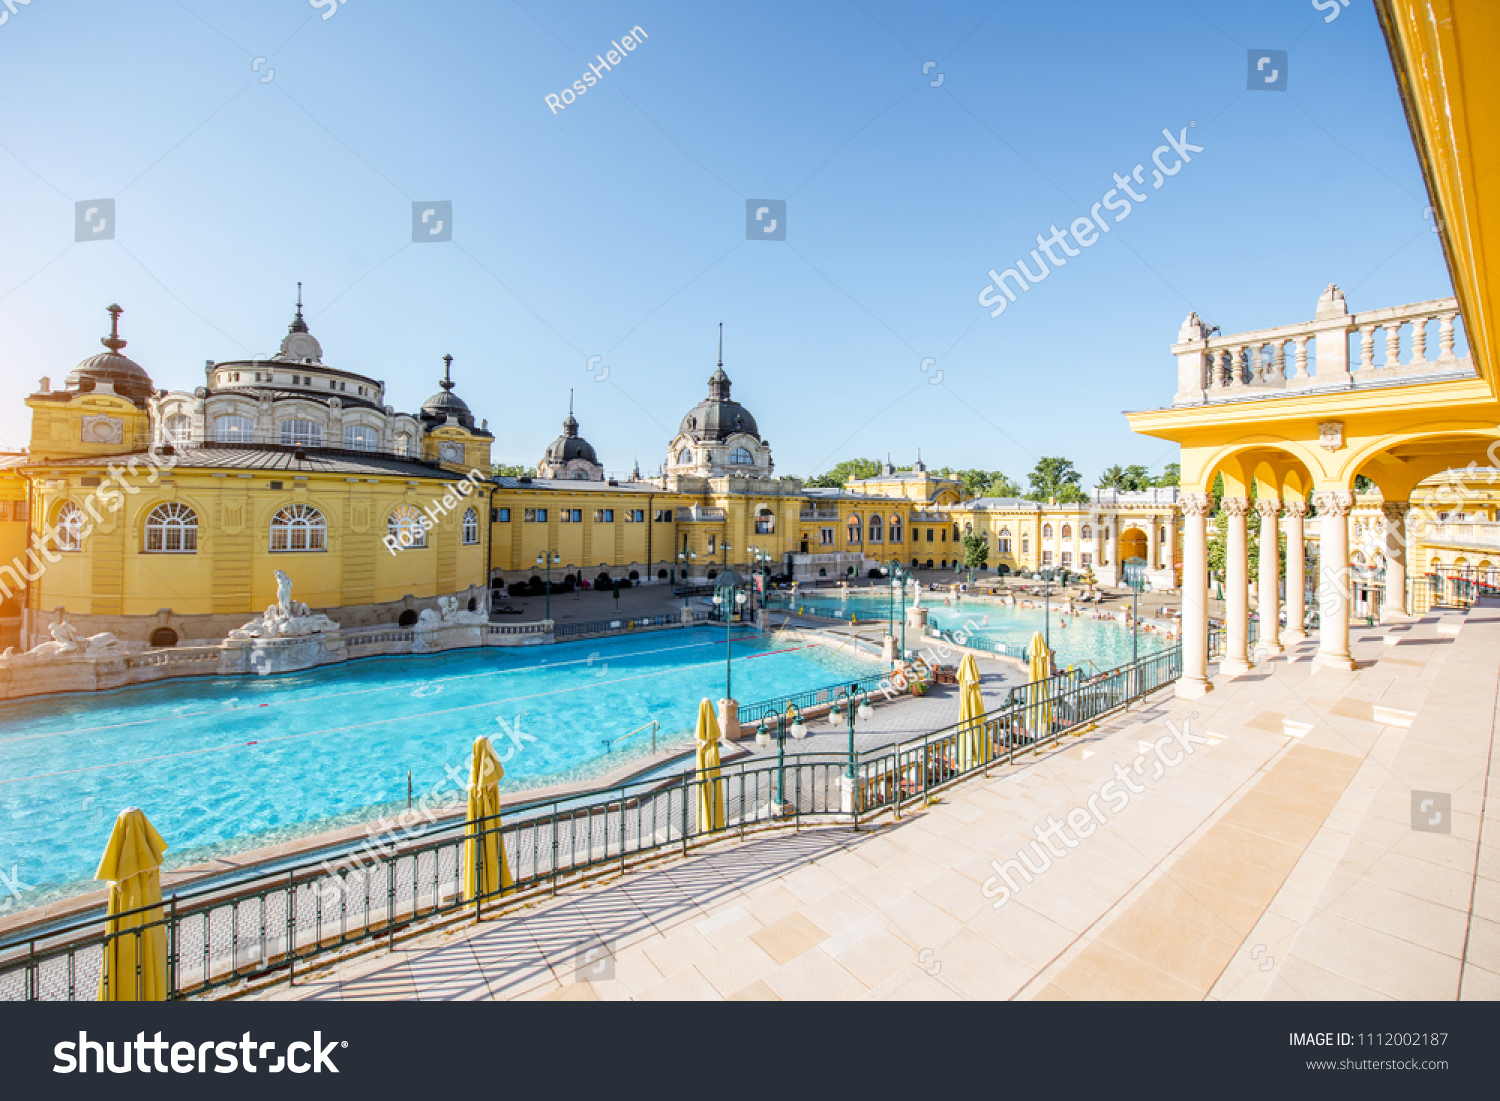 Szechenyi outdoor thermal baths during the morning light without people in Budapest, Hungary #1112002187